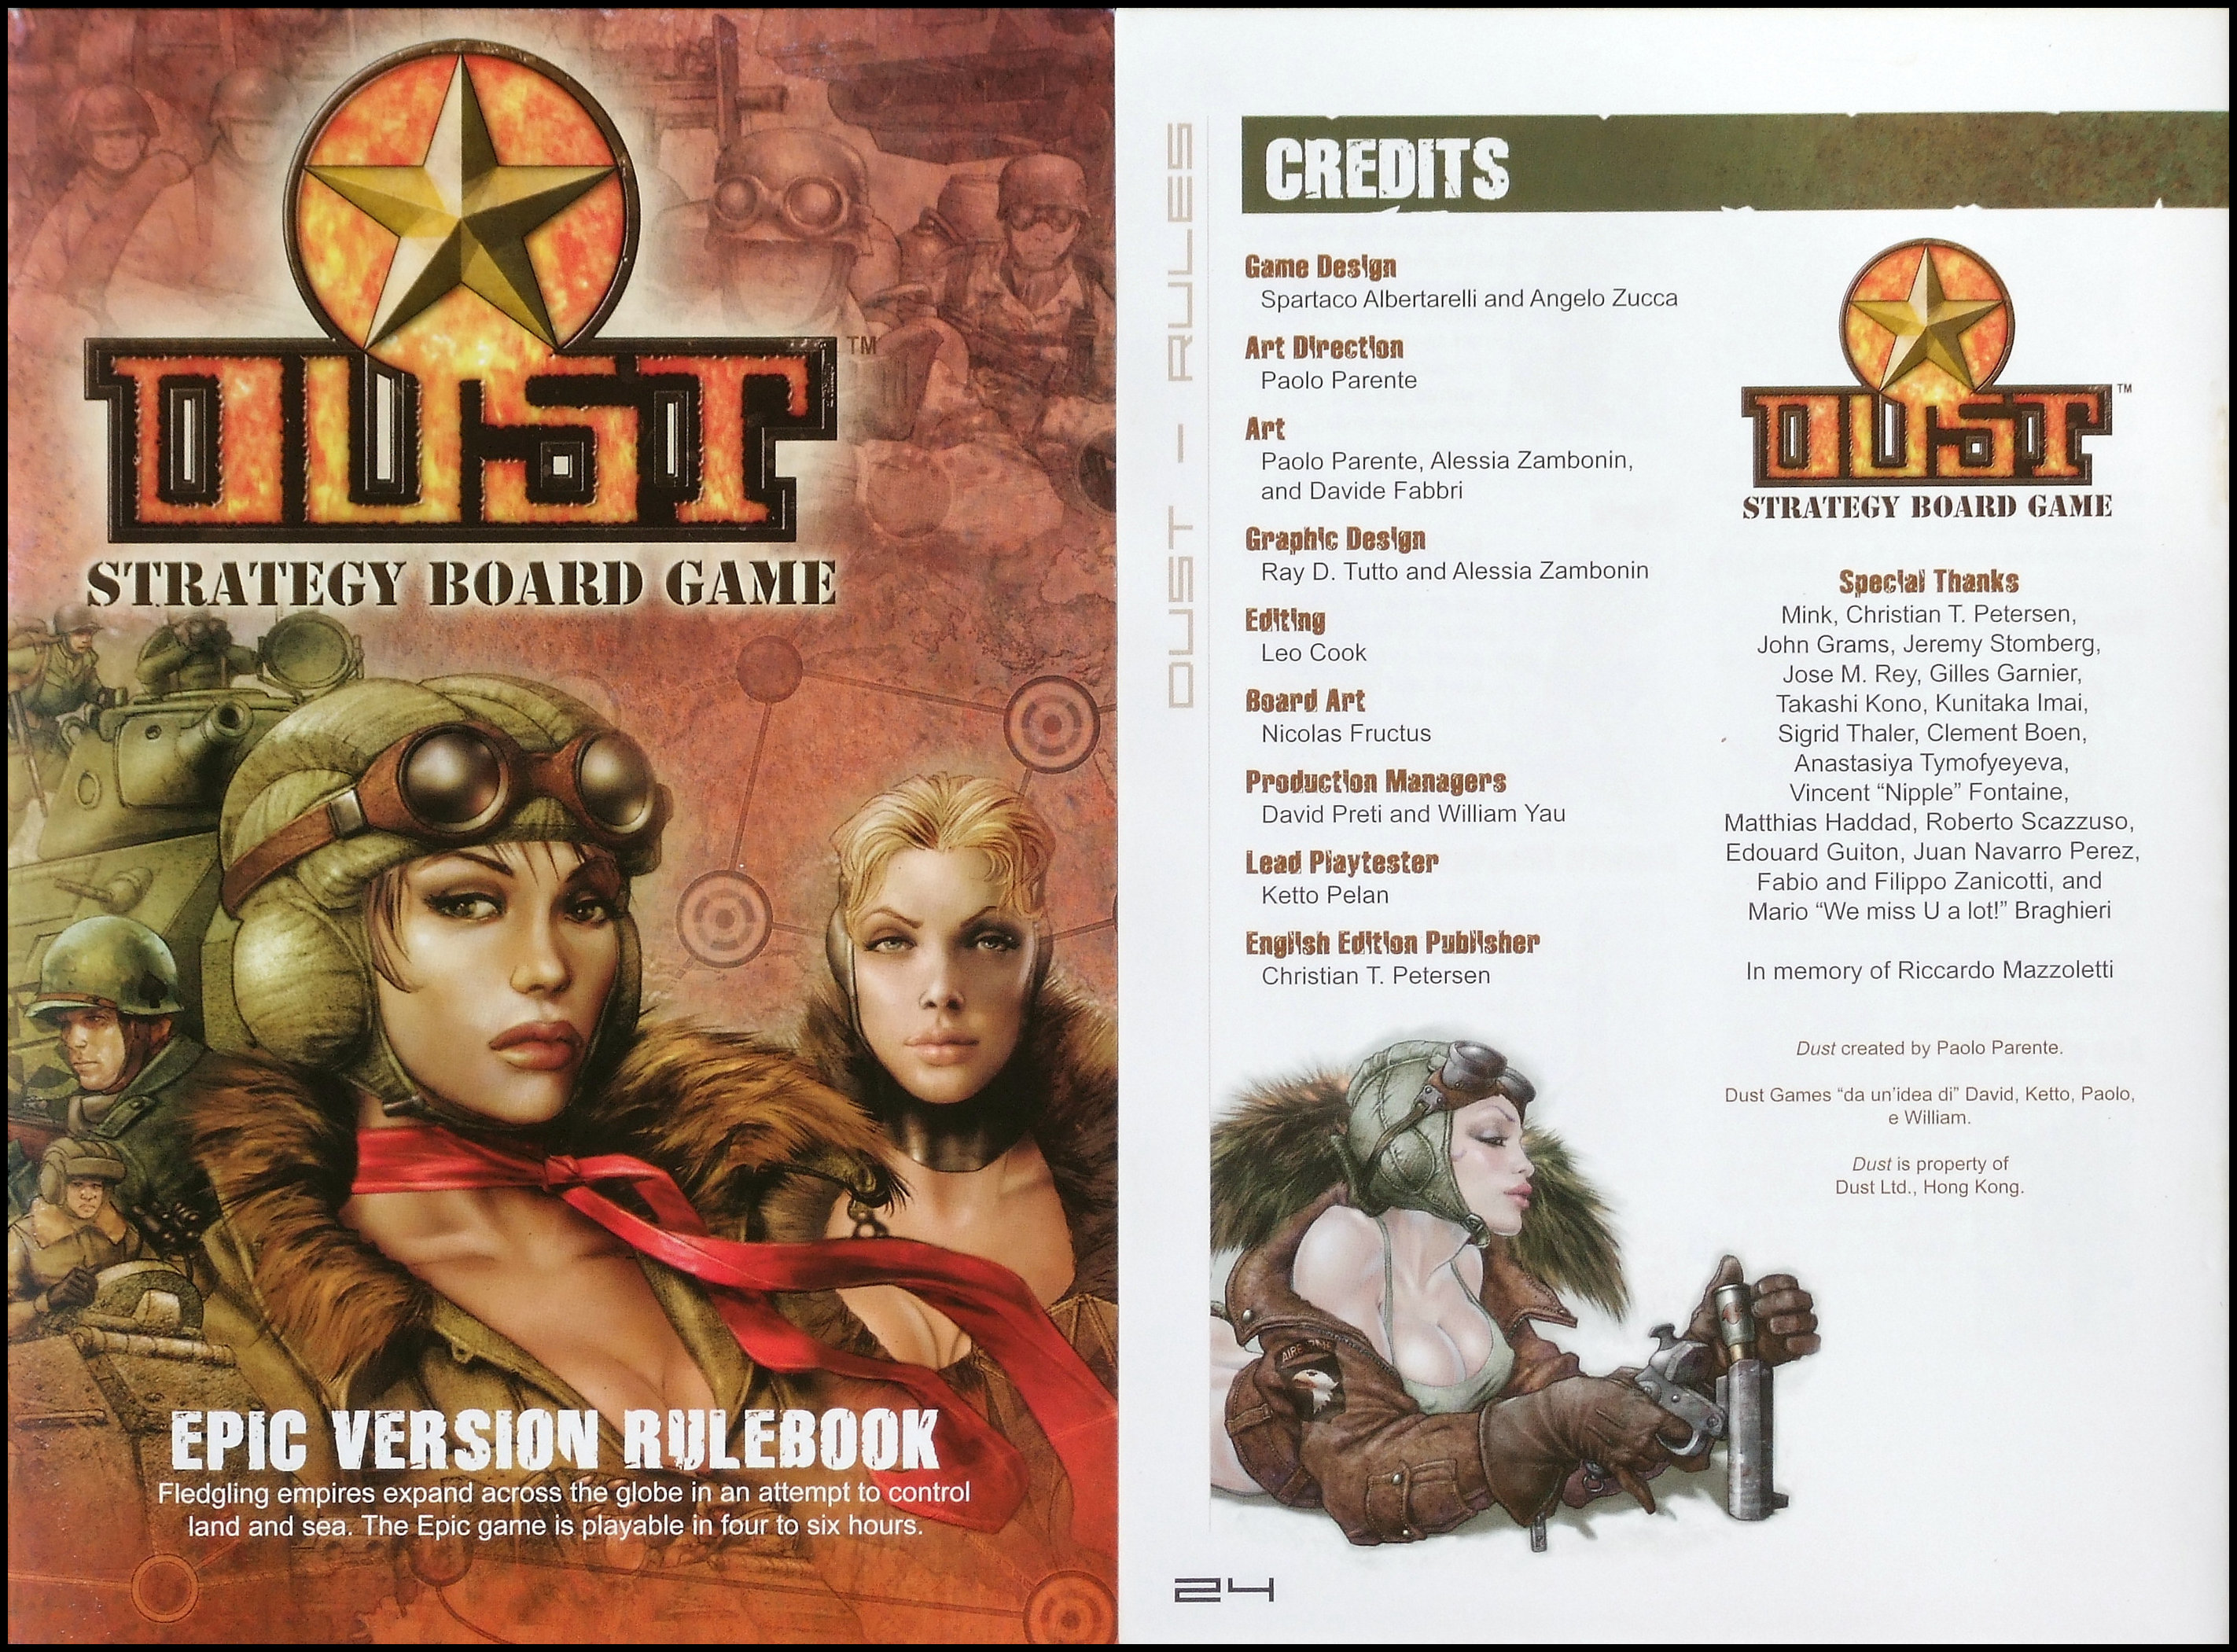 Dust - Epic Version Rulebook Covers